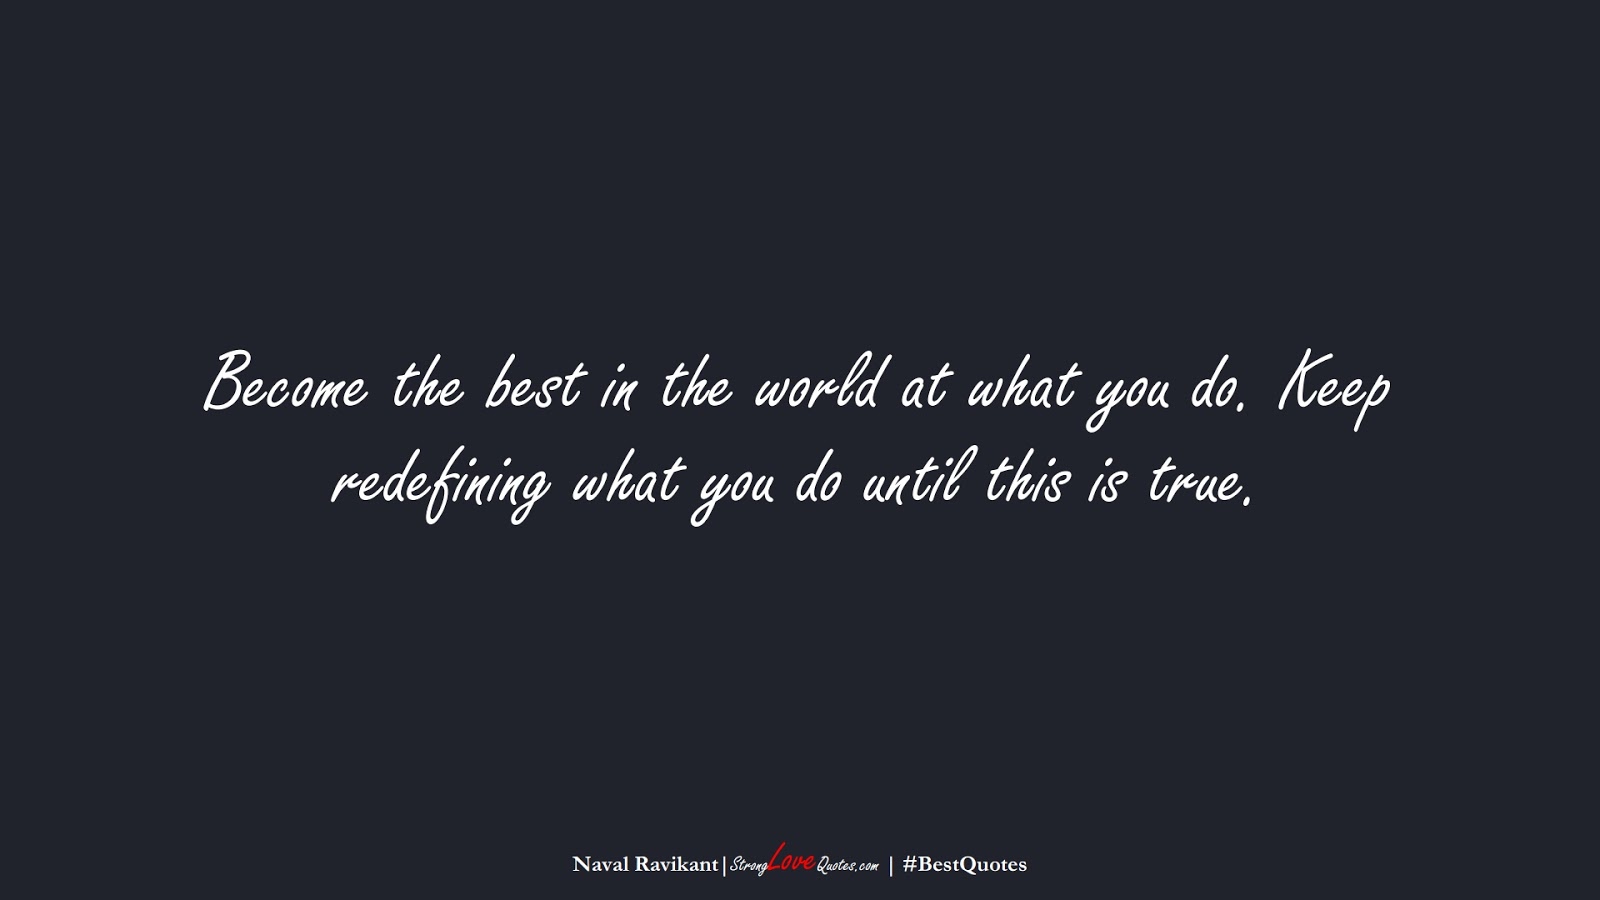 Become the best in the world at what you do. Keep redefining what you do until this is true. (Naval Ravikant);  #BestQuotes